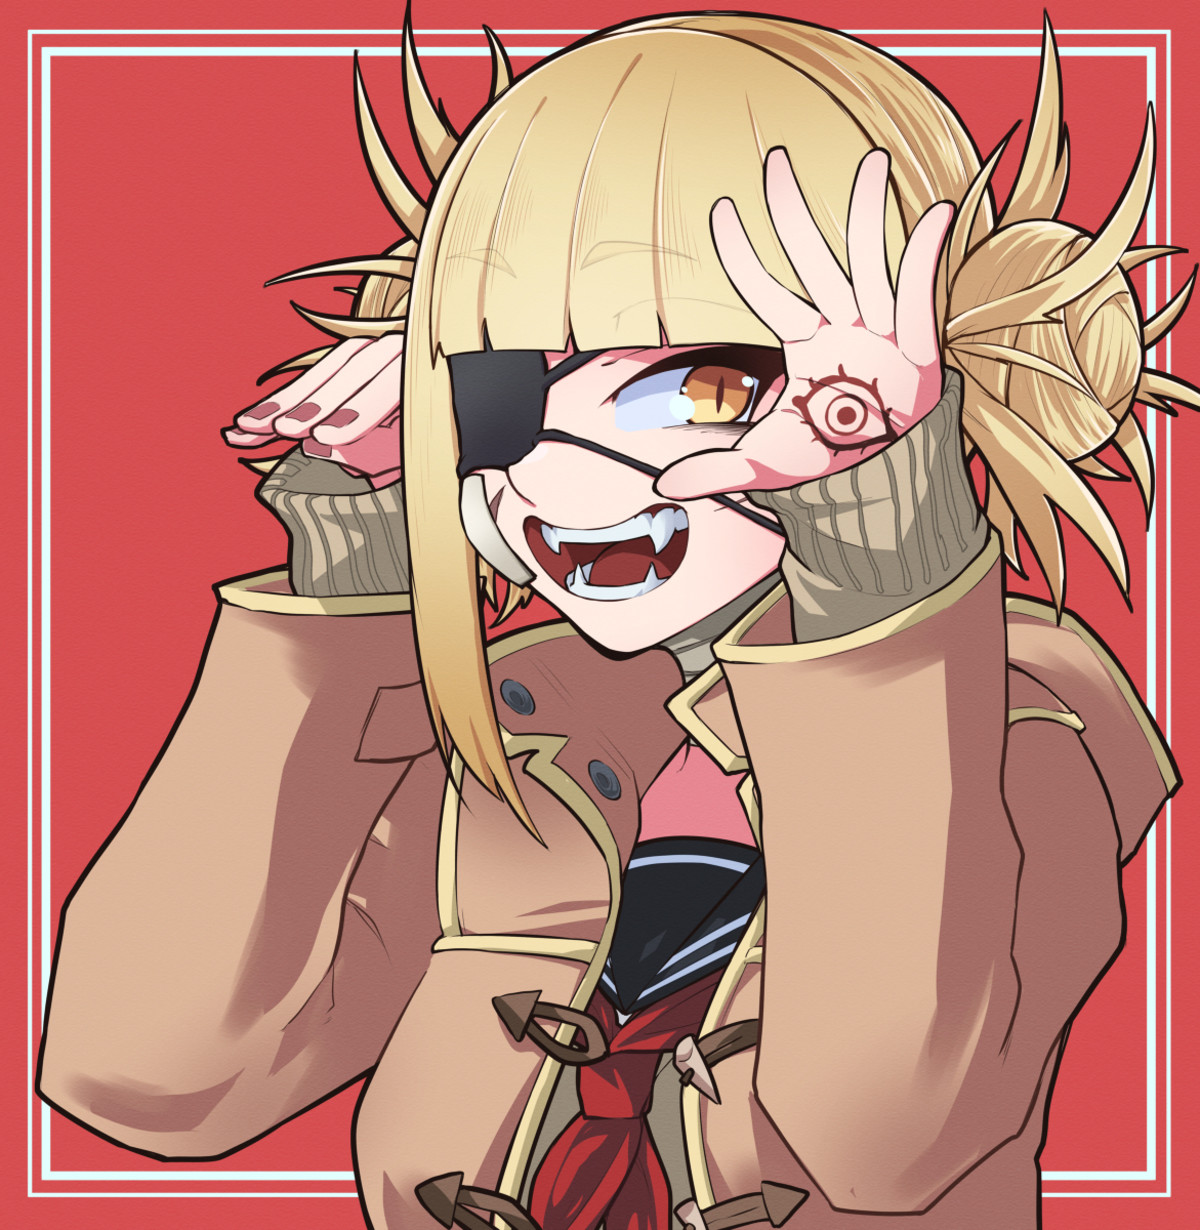 Daily Toga - 969: Eye See. join list: DailyToga (477 subs)Mention History Source: .